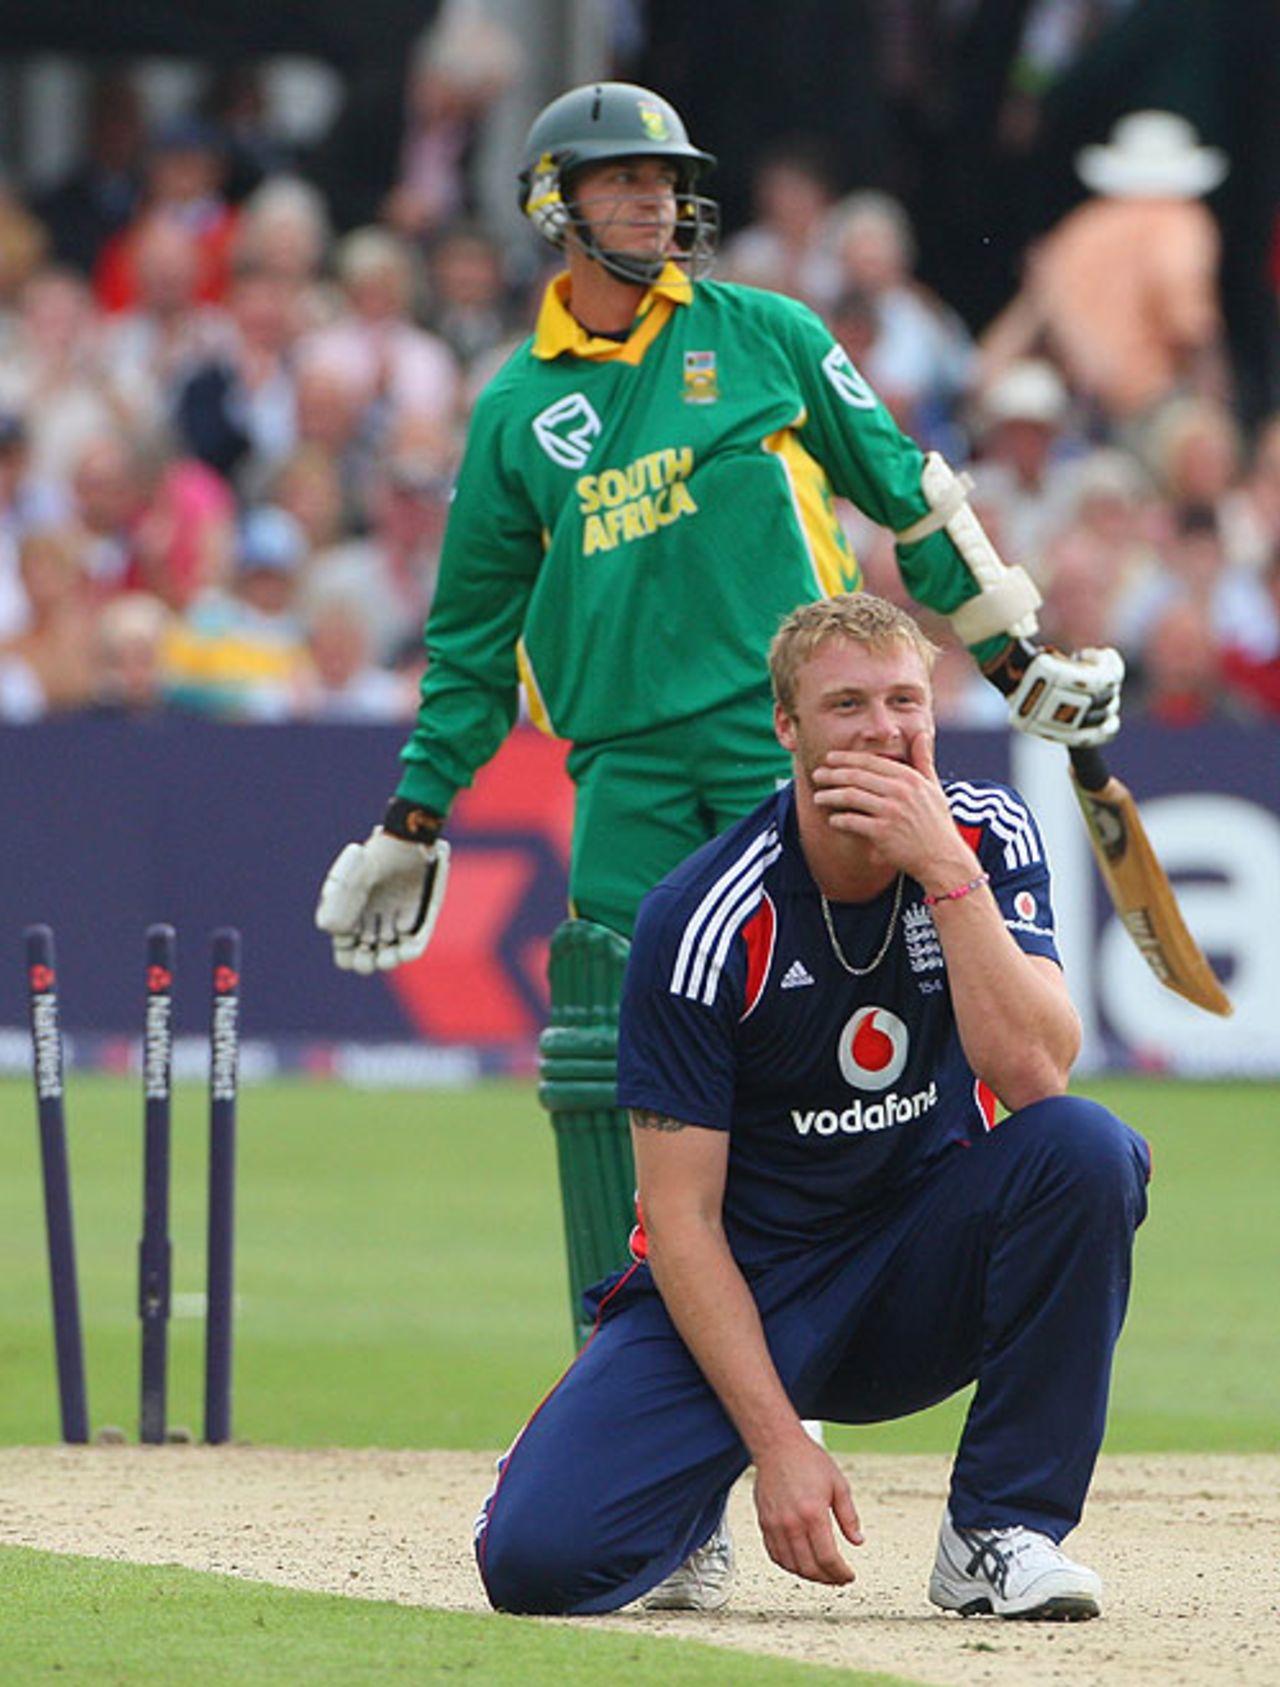 Andrew Flintoff can't hide his amusement as South Africa are bowled out for 83, England v South Africa, 2nd ODI, Trent Bridge, August 26, 2008